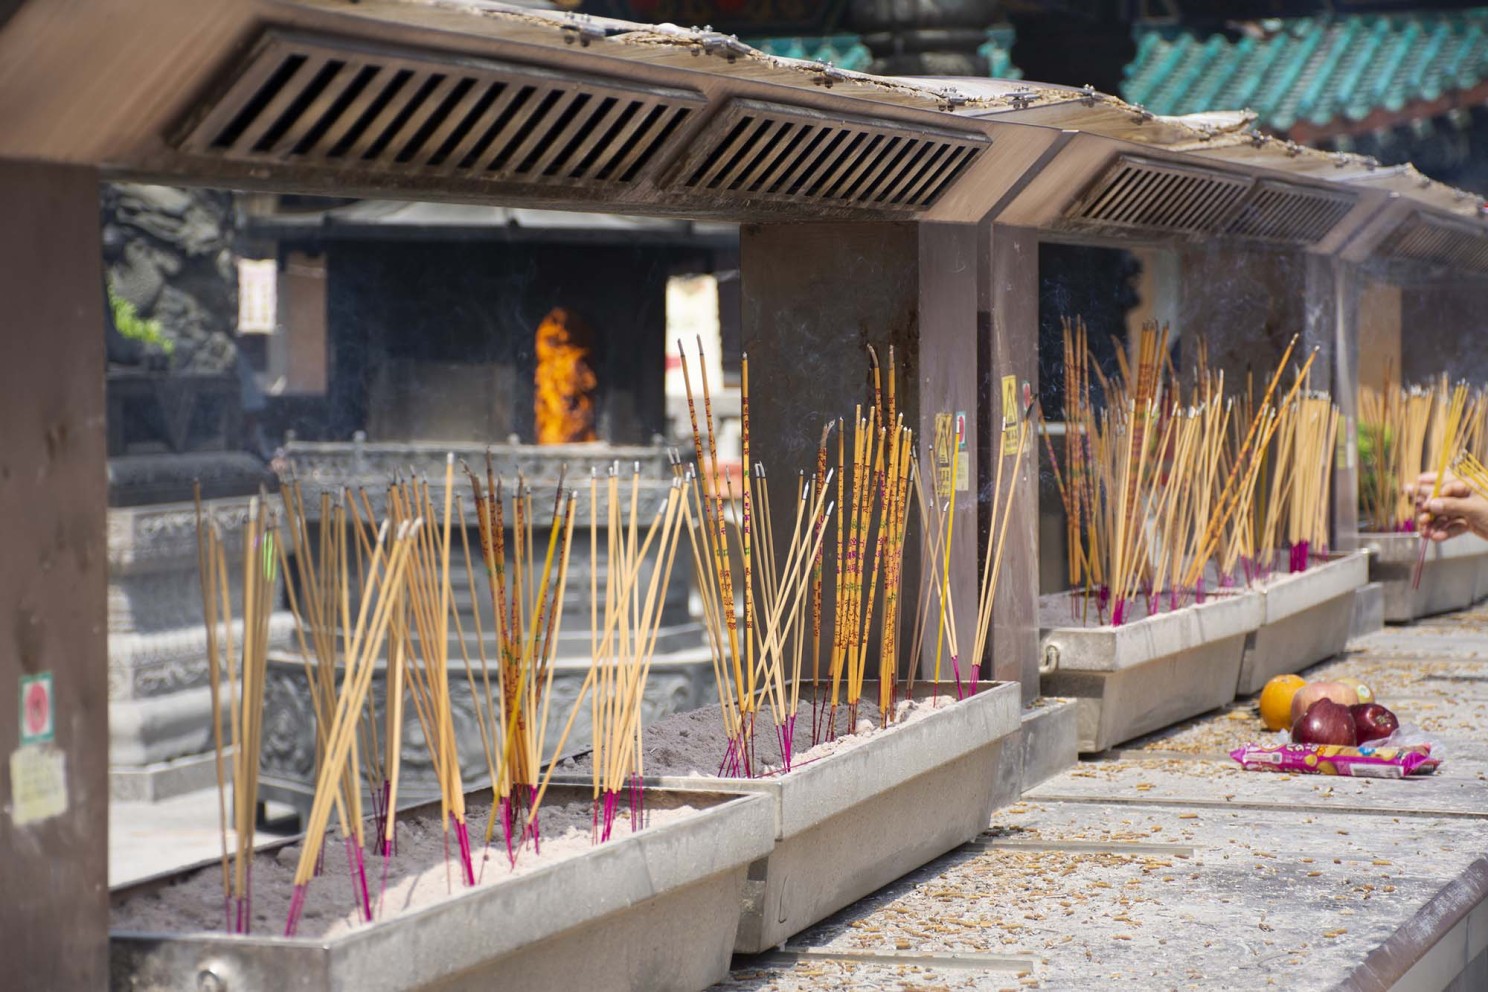 LU study finds air pollution levels of incense-burning temples far exceeds air quality standards